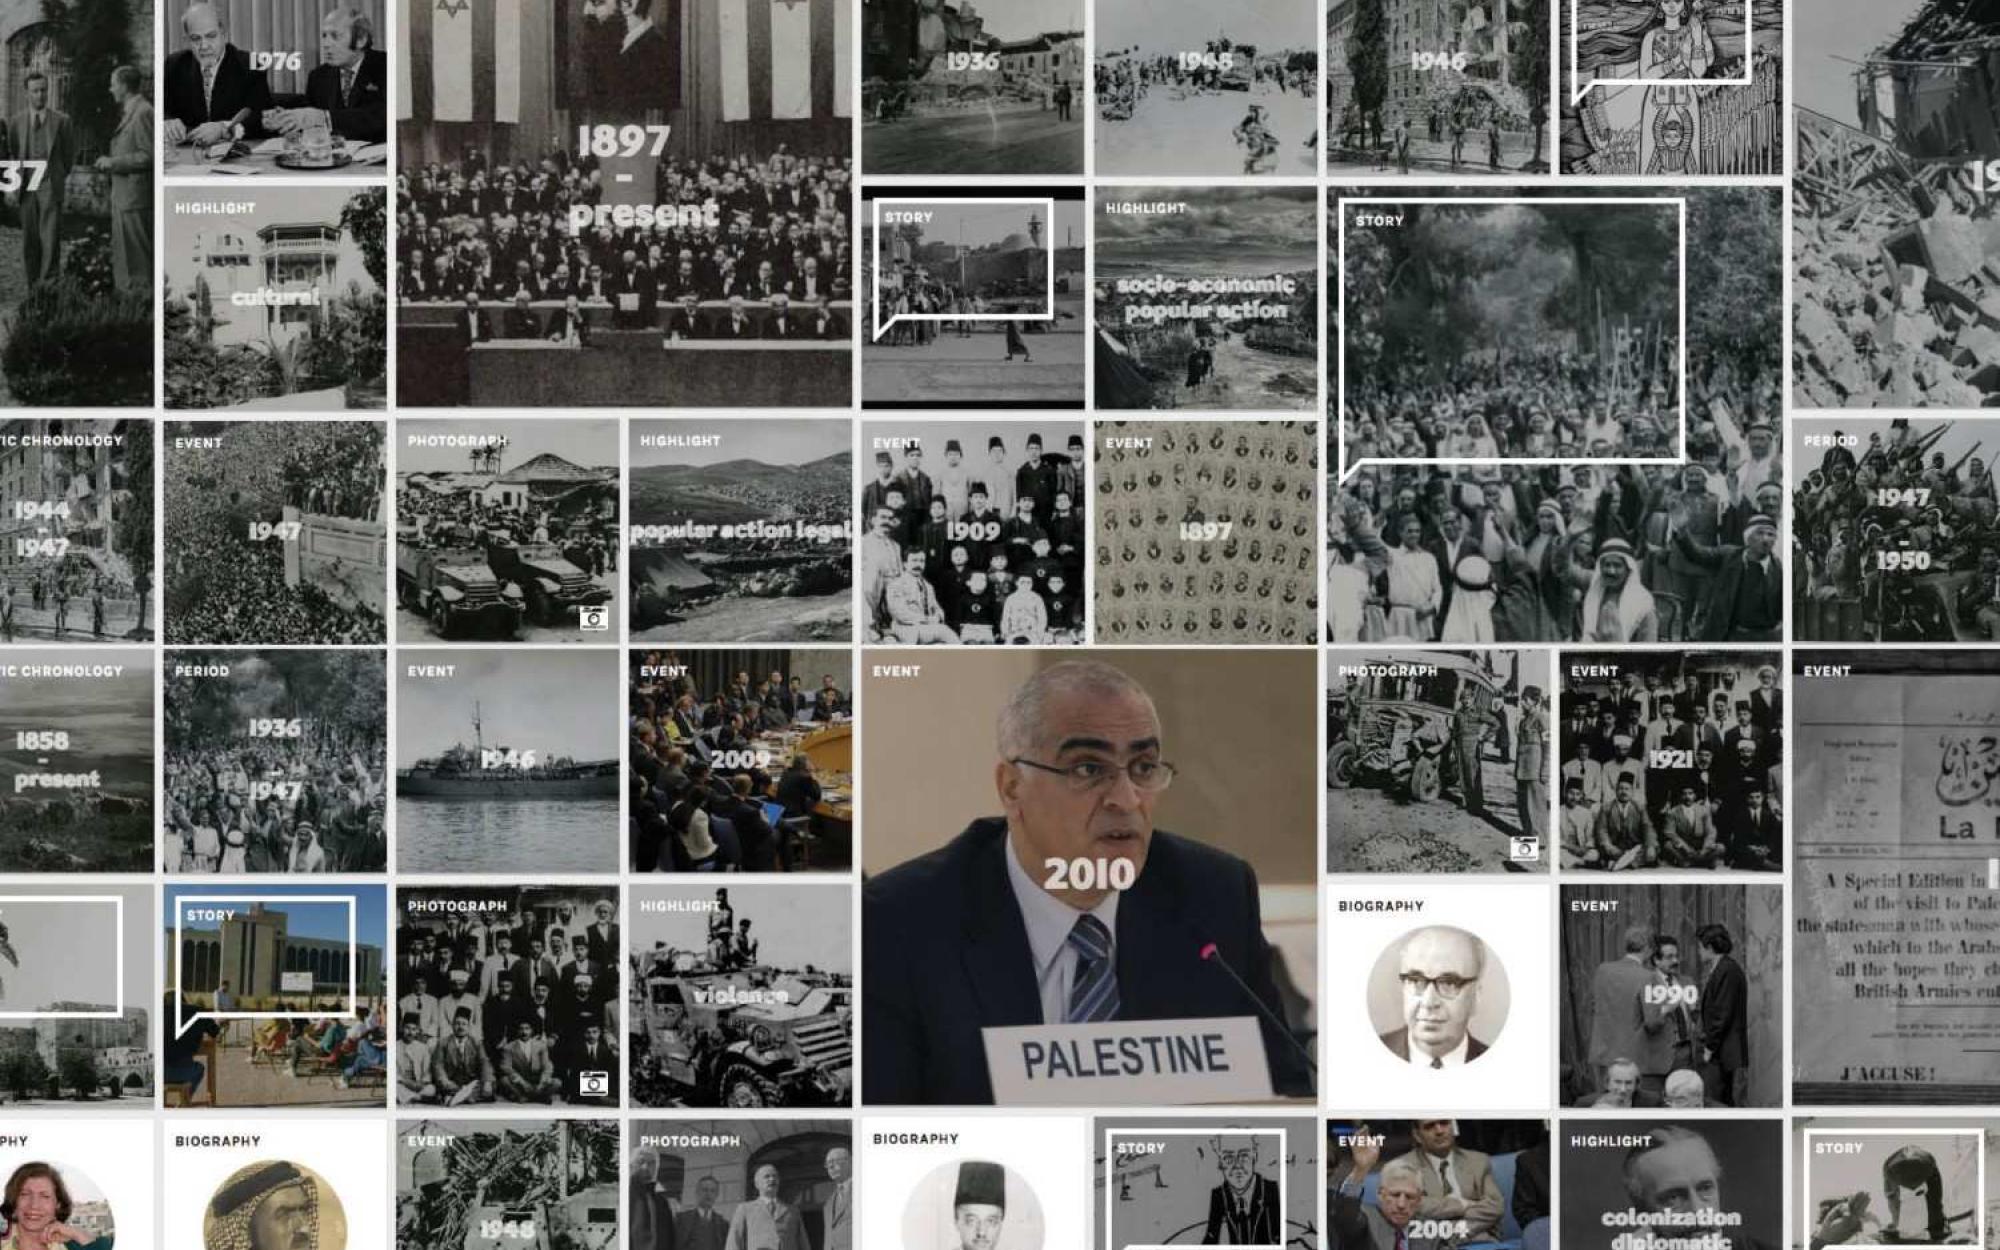  Interactive Encyclopedia of the Palestine Question